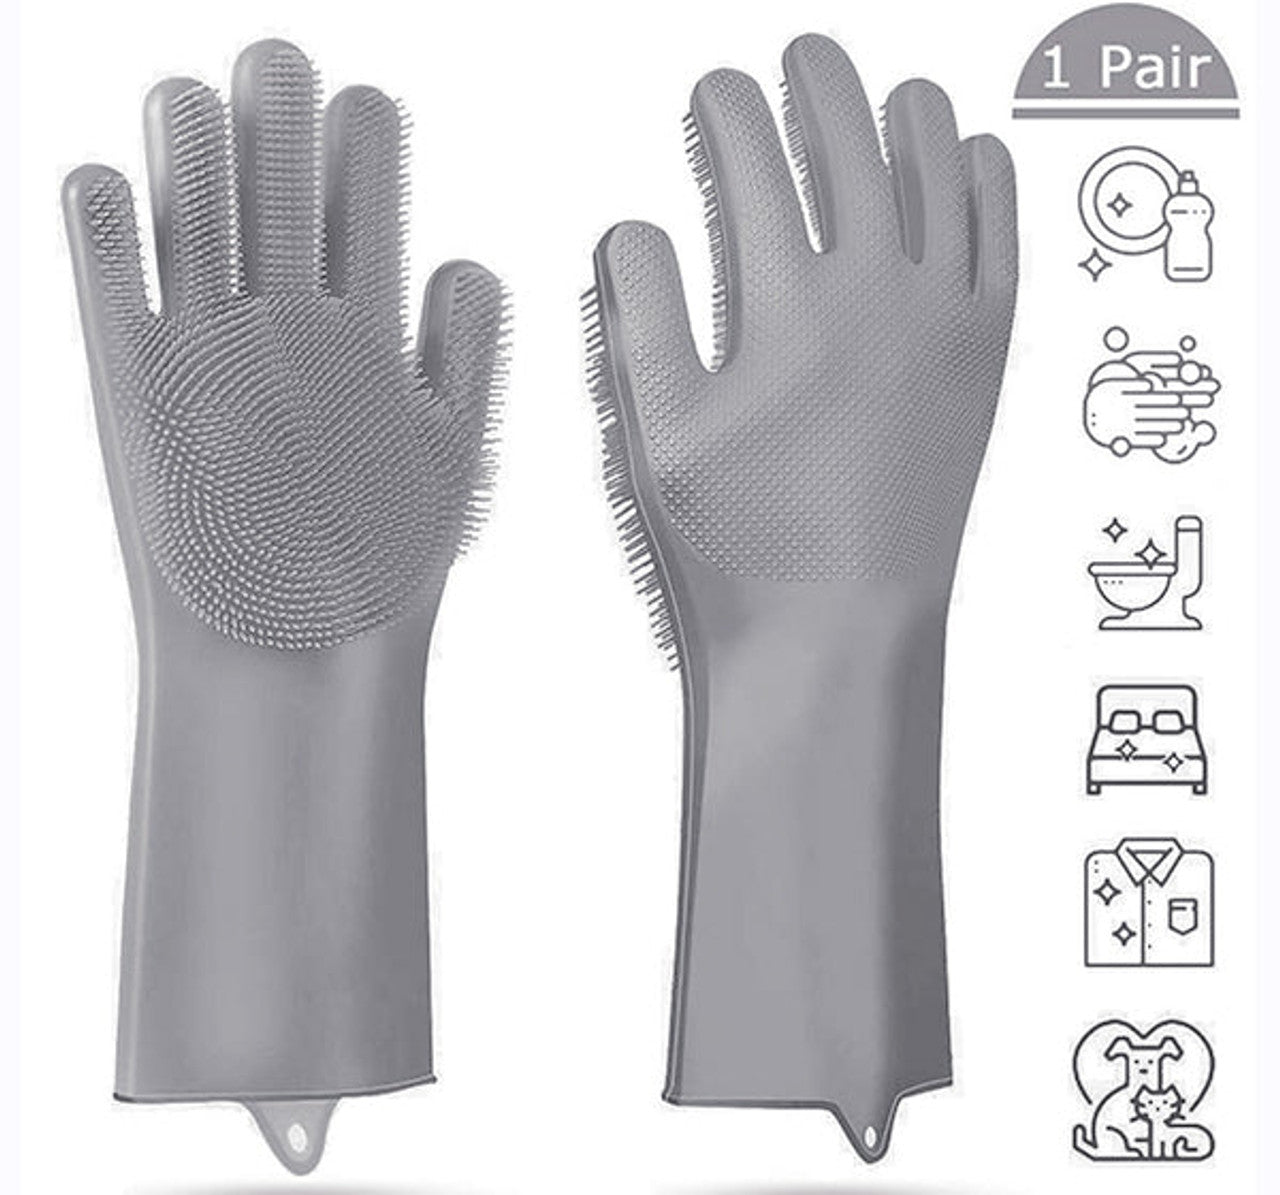 Silicone Washing Full Finger Gloves – For Home (random Colors)